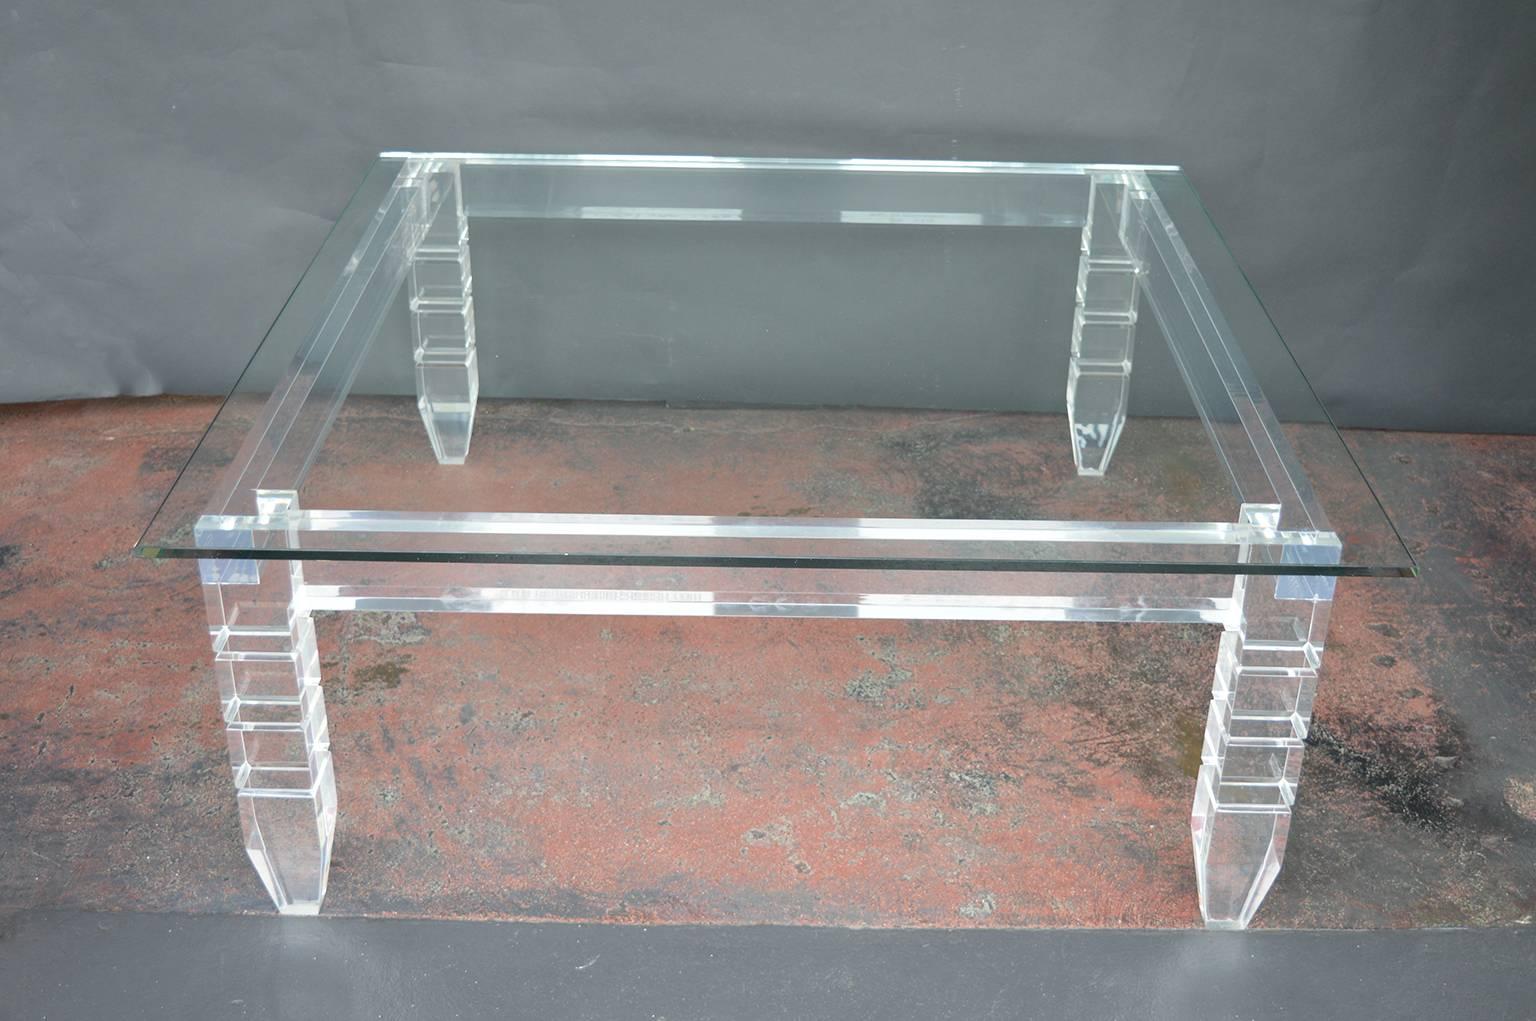 Grand Lucite cocktail table. The legs are solid 3